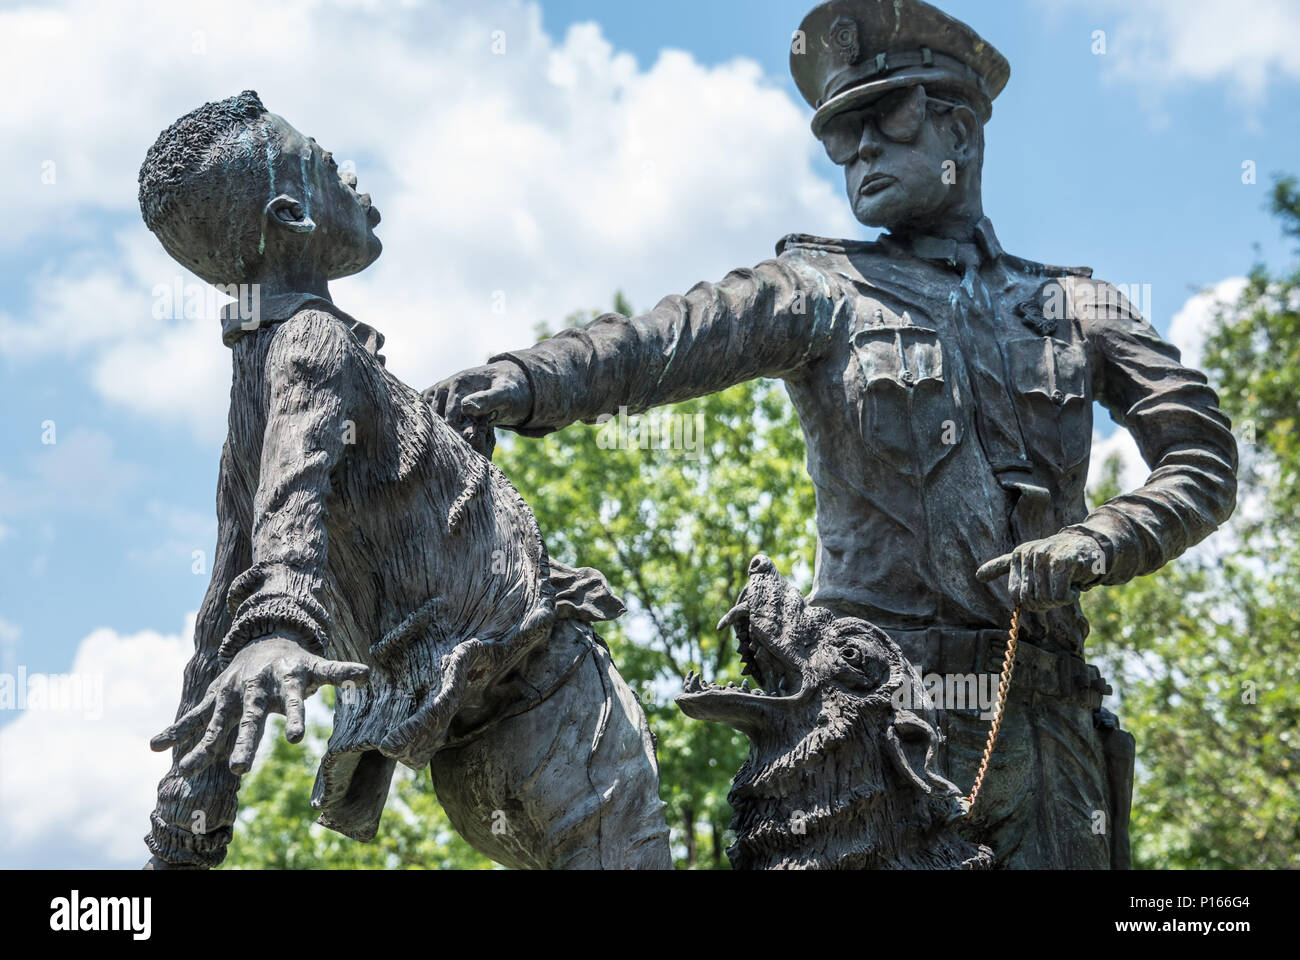 The Foot Soldier sculpture at Kelly Ingram Park in Birmingham, AL depicts  a 1963 confrontation between black protesters and police with attack dogs. Stock Photo